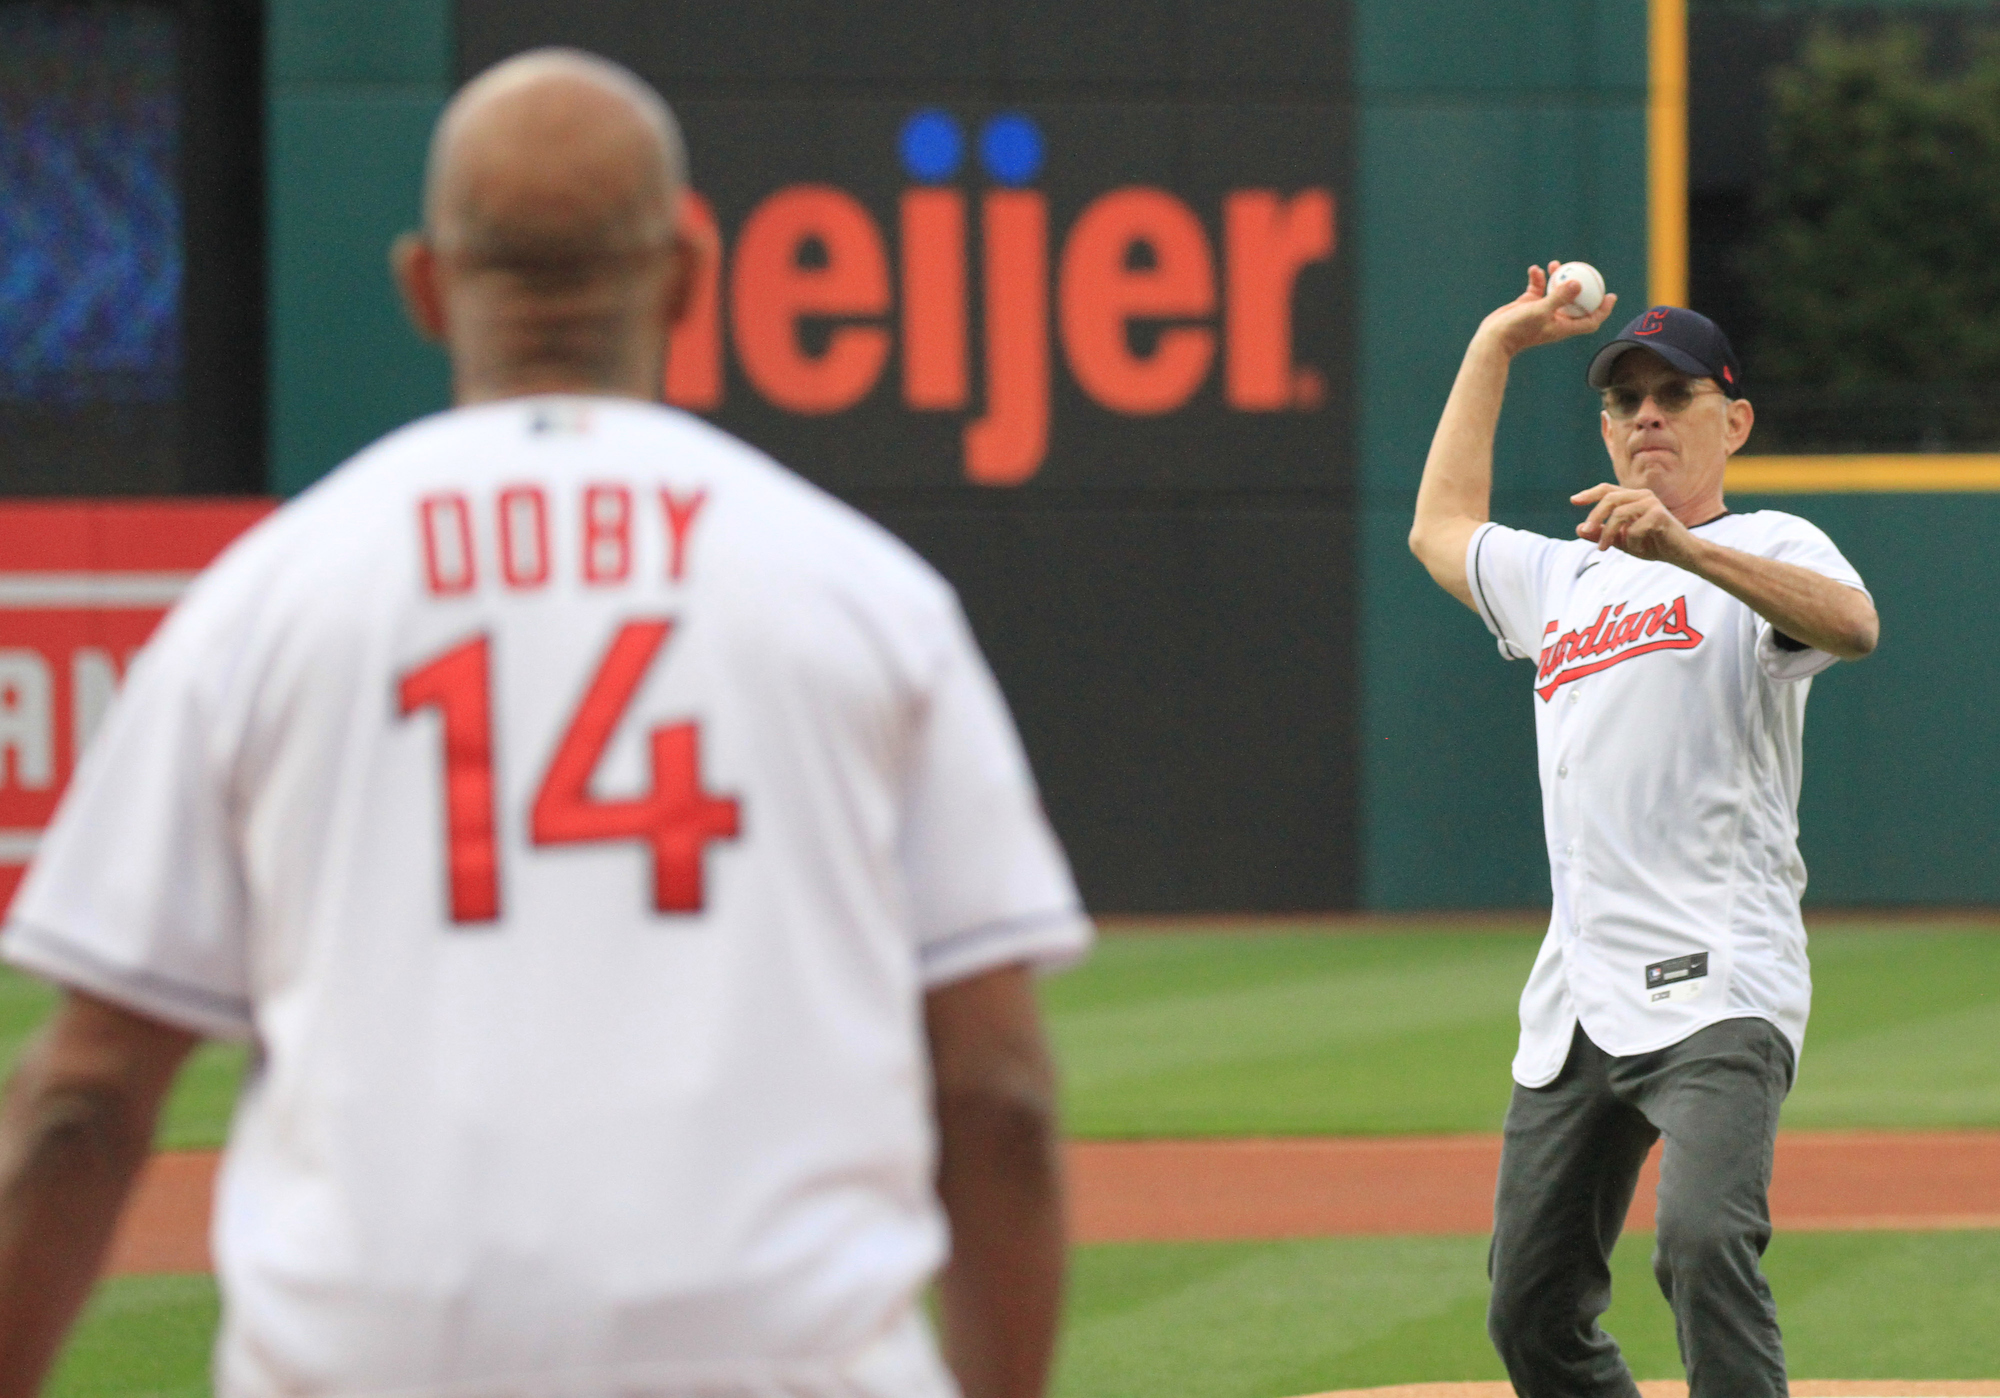 Larry Doby Jr. to catch ceremonial first pitch from Tom Hanks